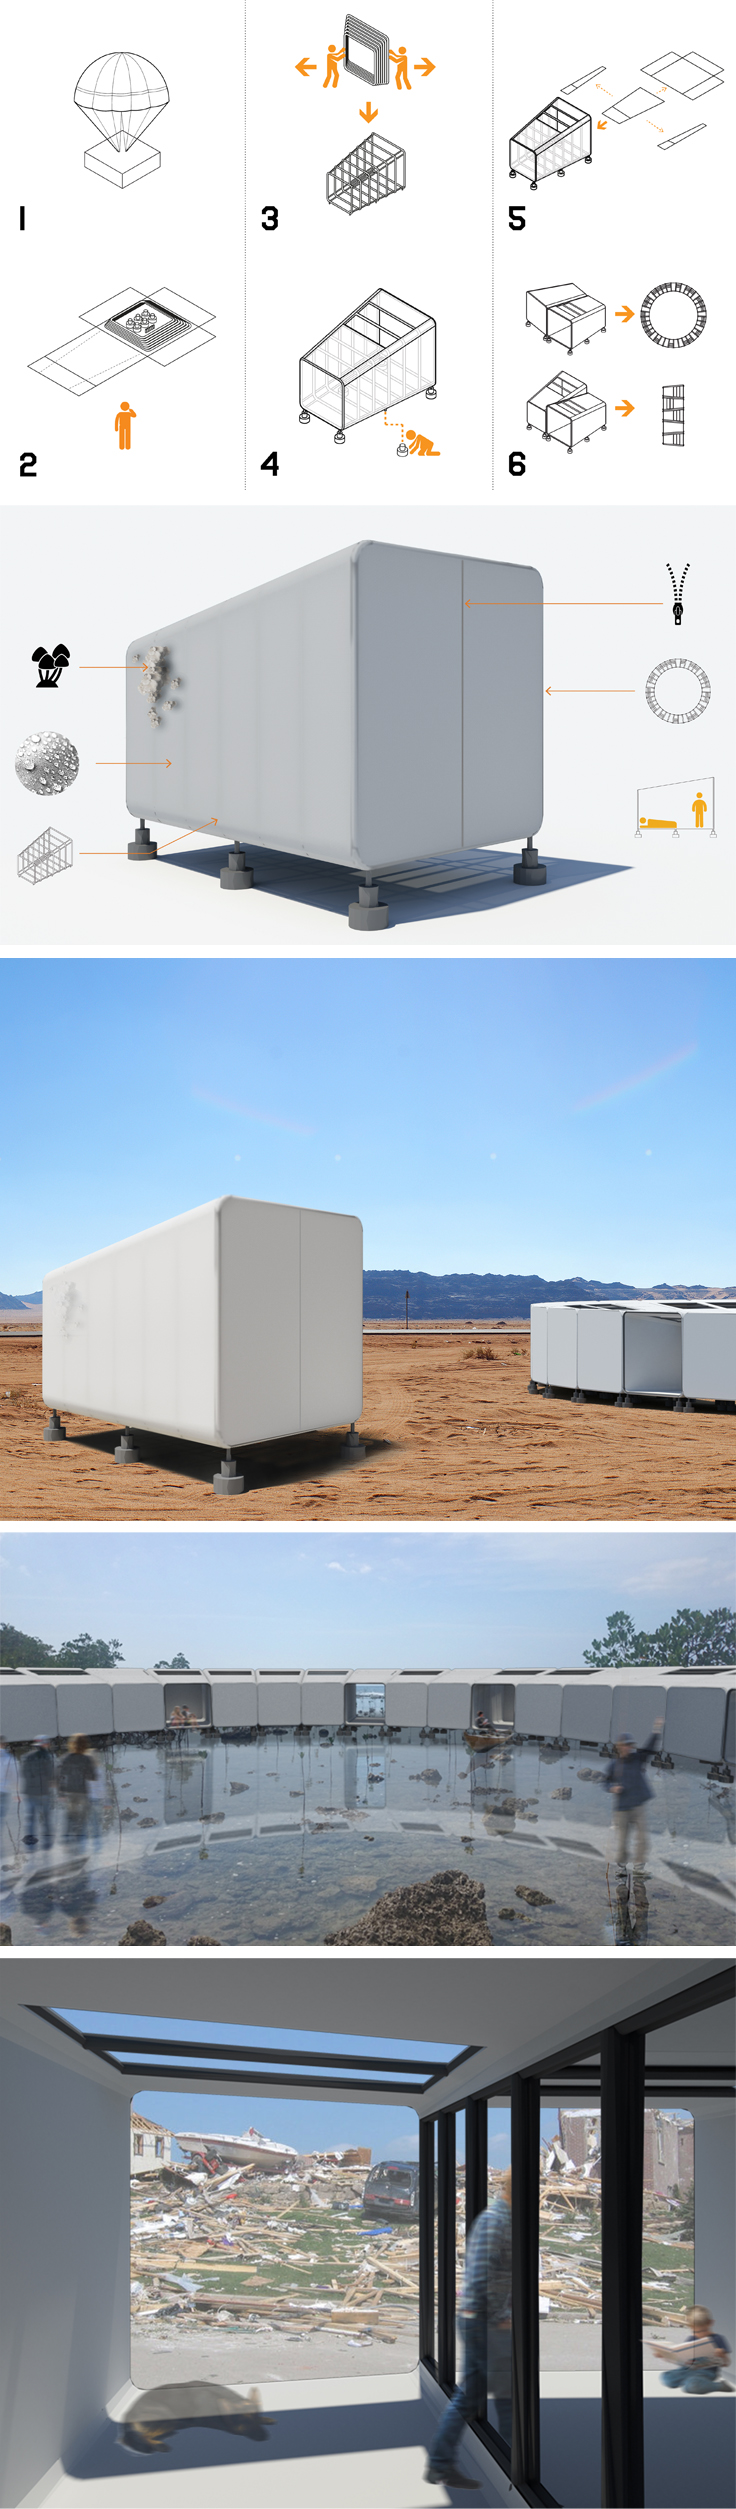 A temporary shelter for displaced populations, Homeless YET Home POD is a lightweight, modular, easily assembled, easily transported, temporary shelter for displaced populations throughout the world. POD: HOMELESS YET HOME | Designer: MODlab (Eric Schwartzbach and Benjamin Ward) | Lexus Design Award 2017 | Milan Design Week | La Triennale di Milano | Awesome Products #product_design